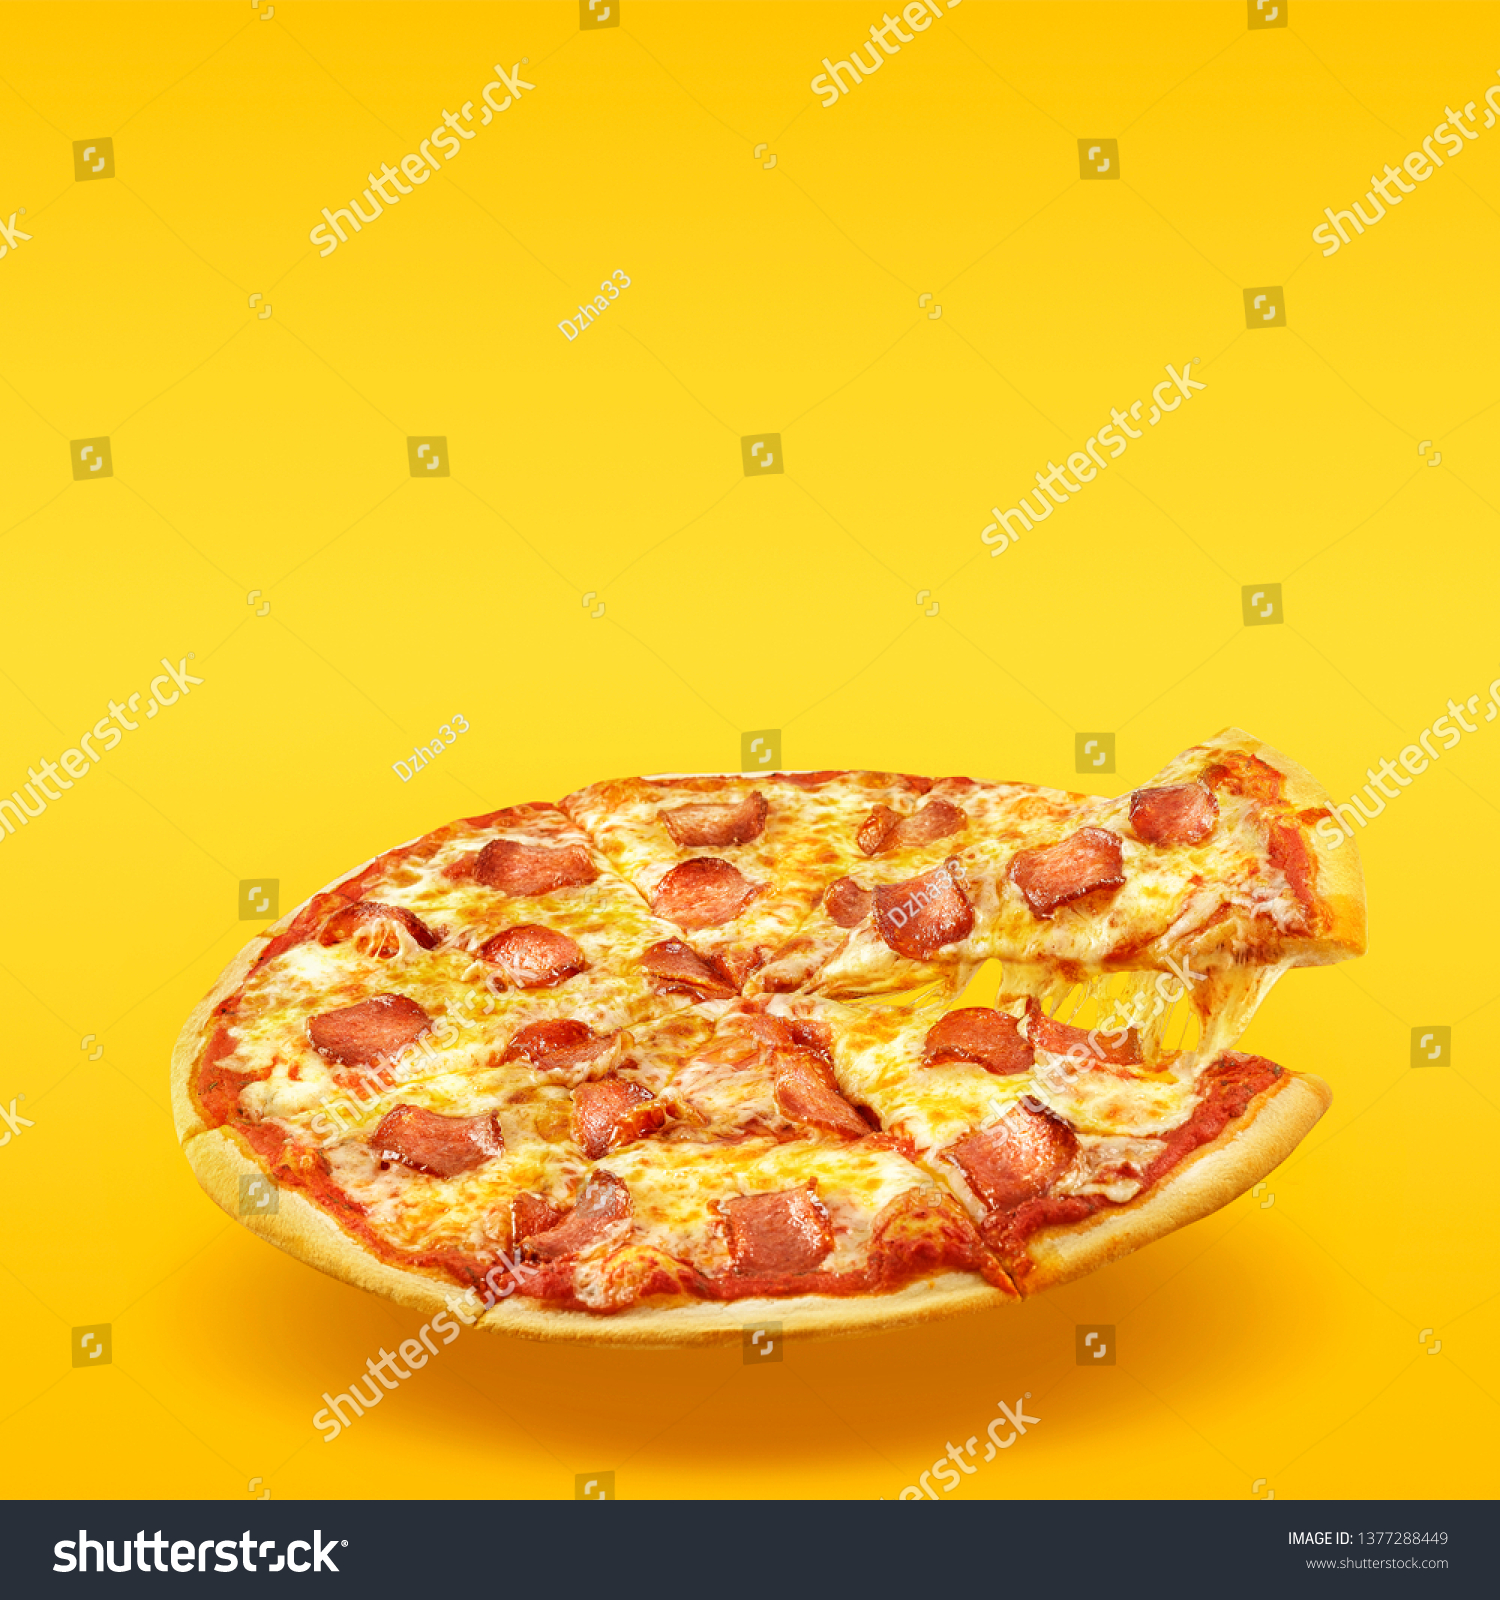 Creative layout of hot delicious pizza in flying on summer orange background. Pizza pepperoni design mockup flyer or poster for promotions and discounts with copy space. Fast Food concept. #1377288449